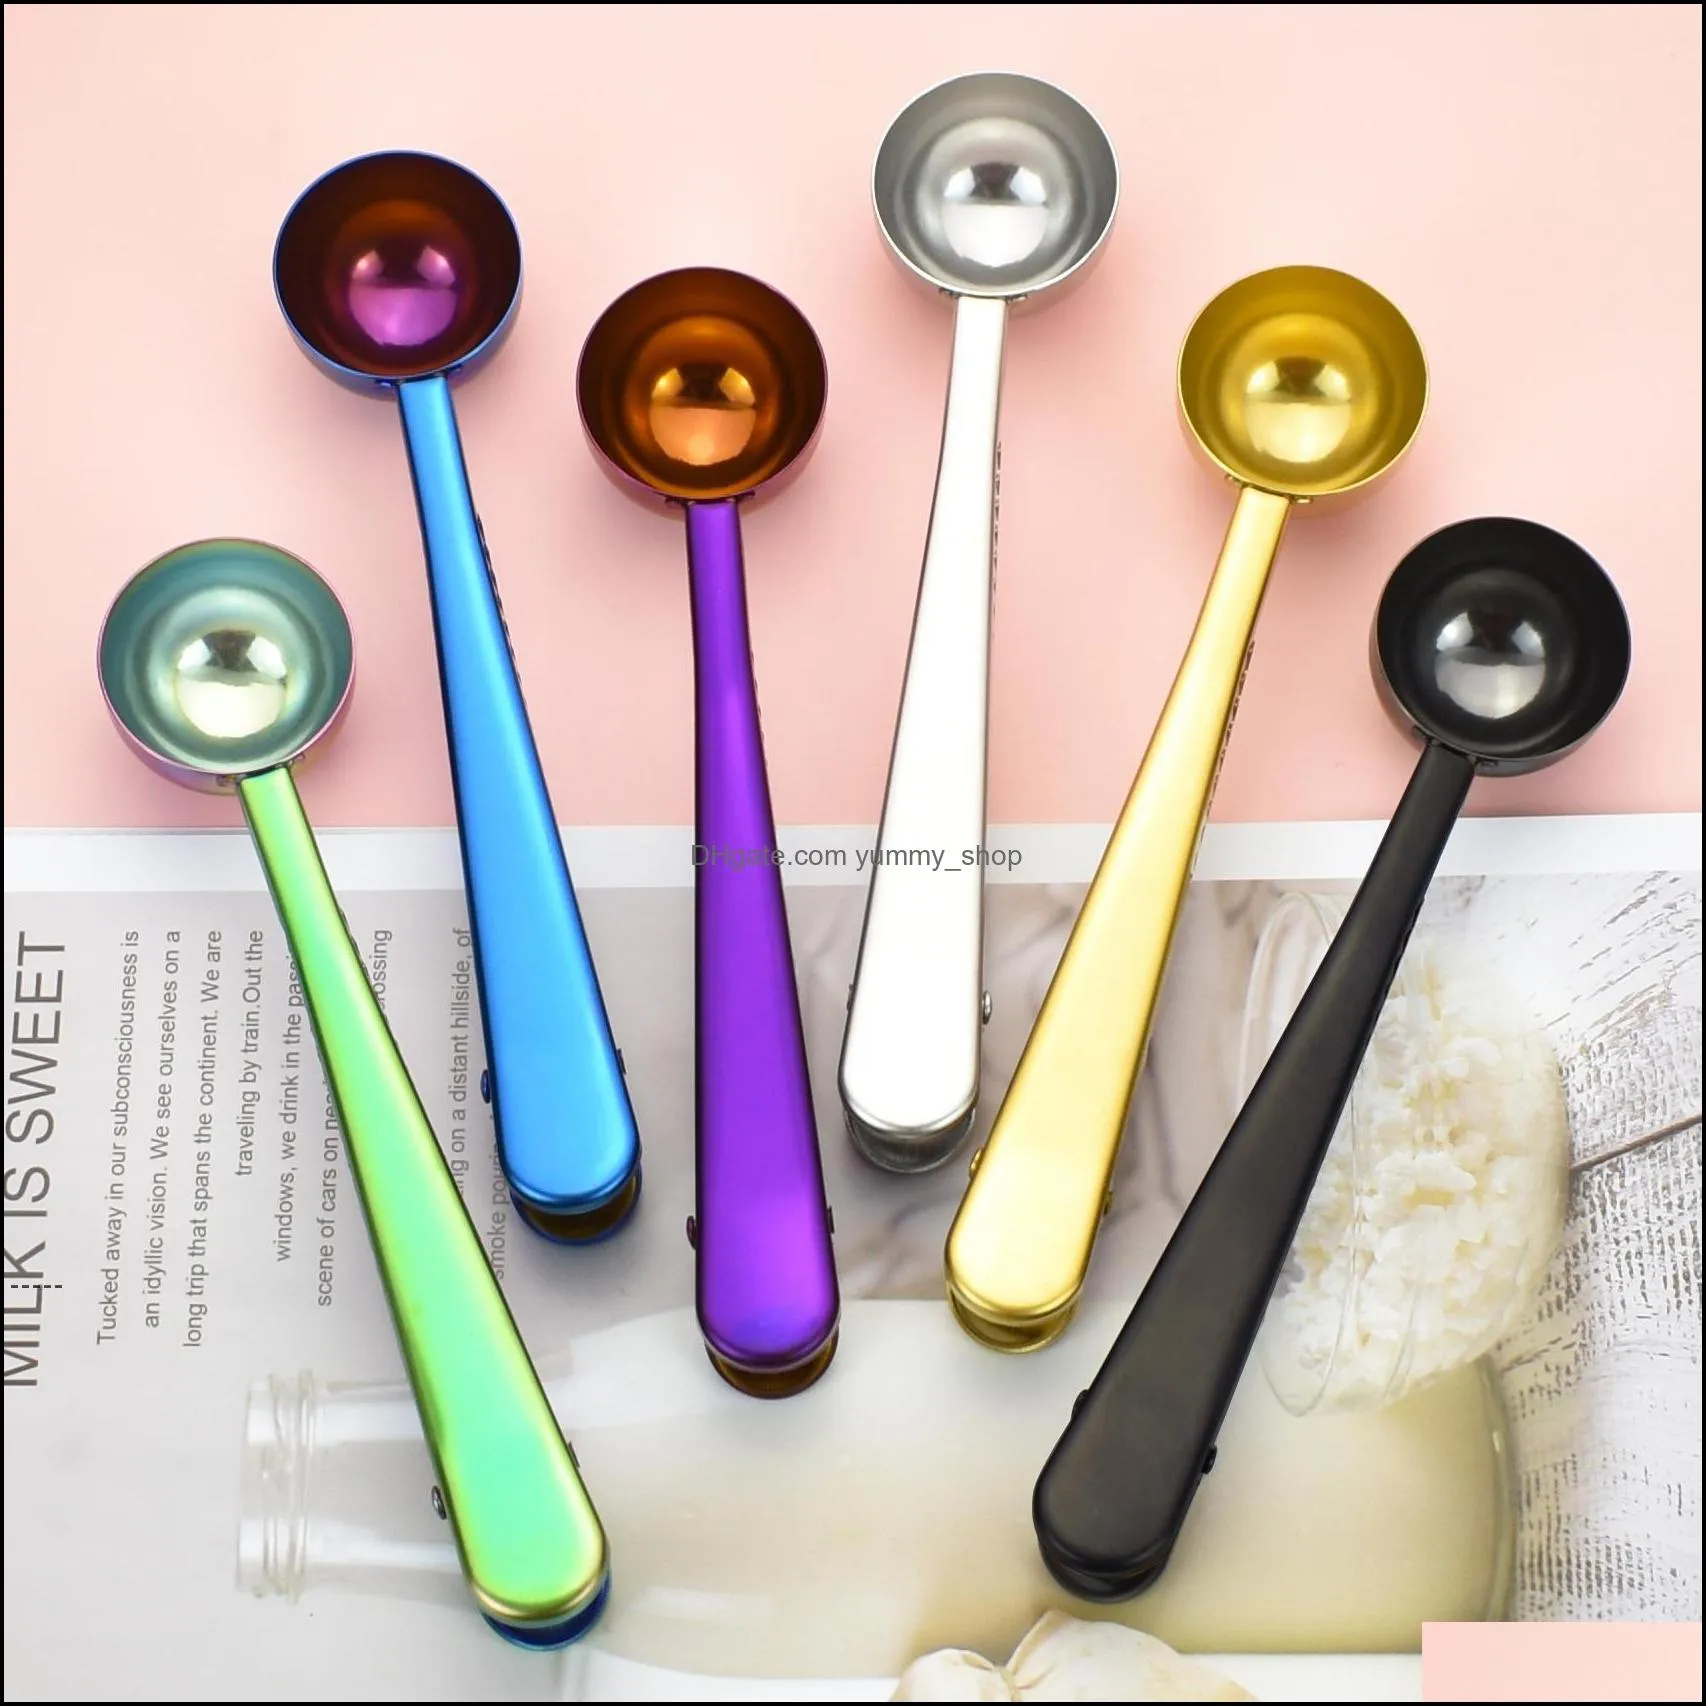 Spoons Newstainless Steel Coffee Measuring Spoon With Bag Seal Clip Mtifunction Jelly Ice Cream Fruit Scoop Kitchen Accessories Drop Ot8Xh